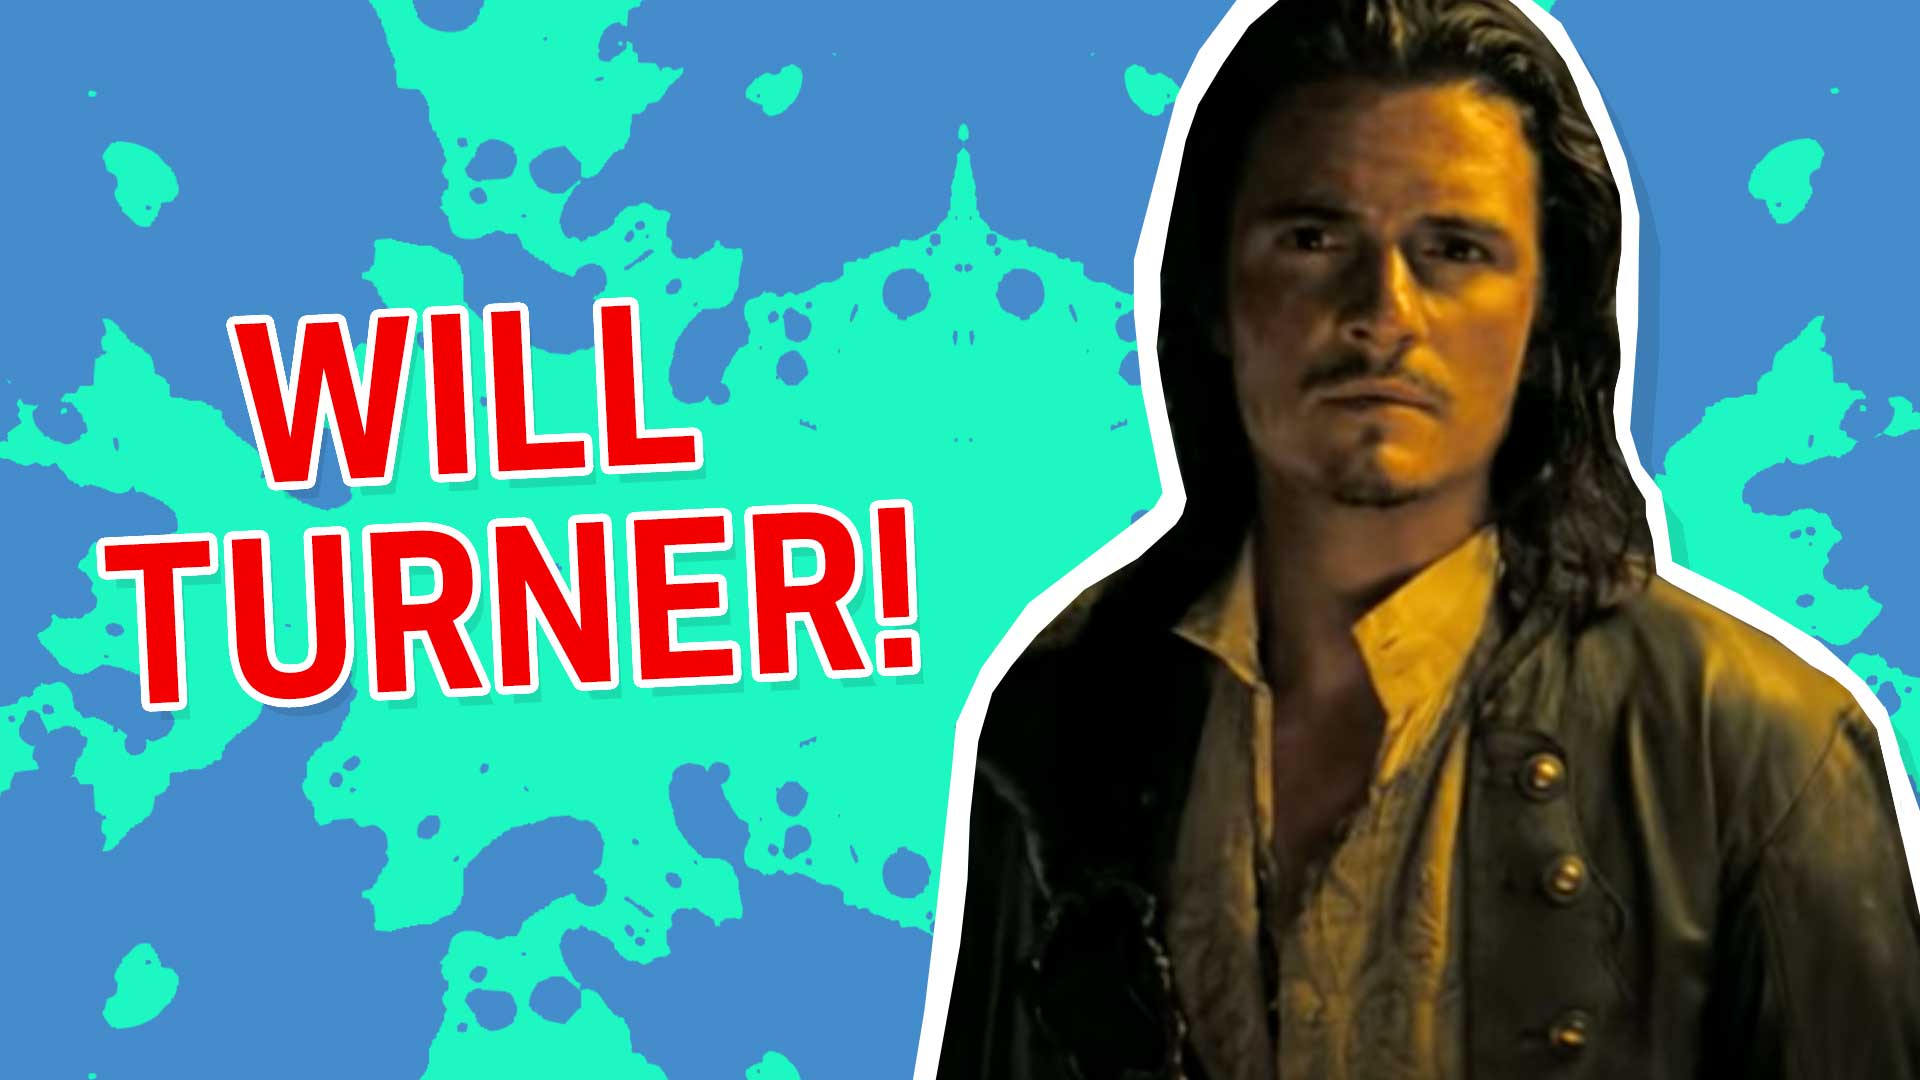 You are Will Turner